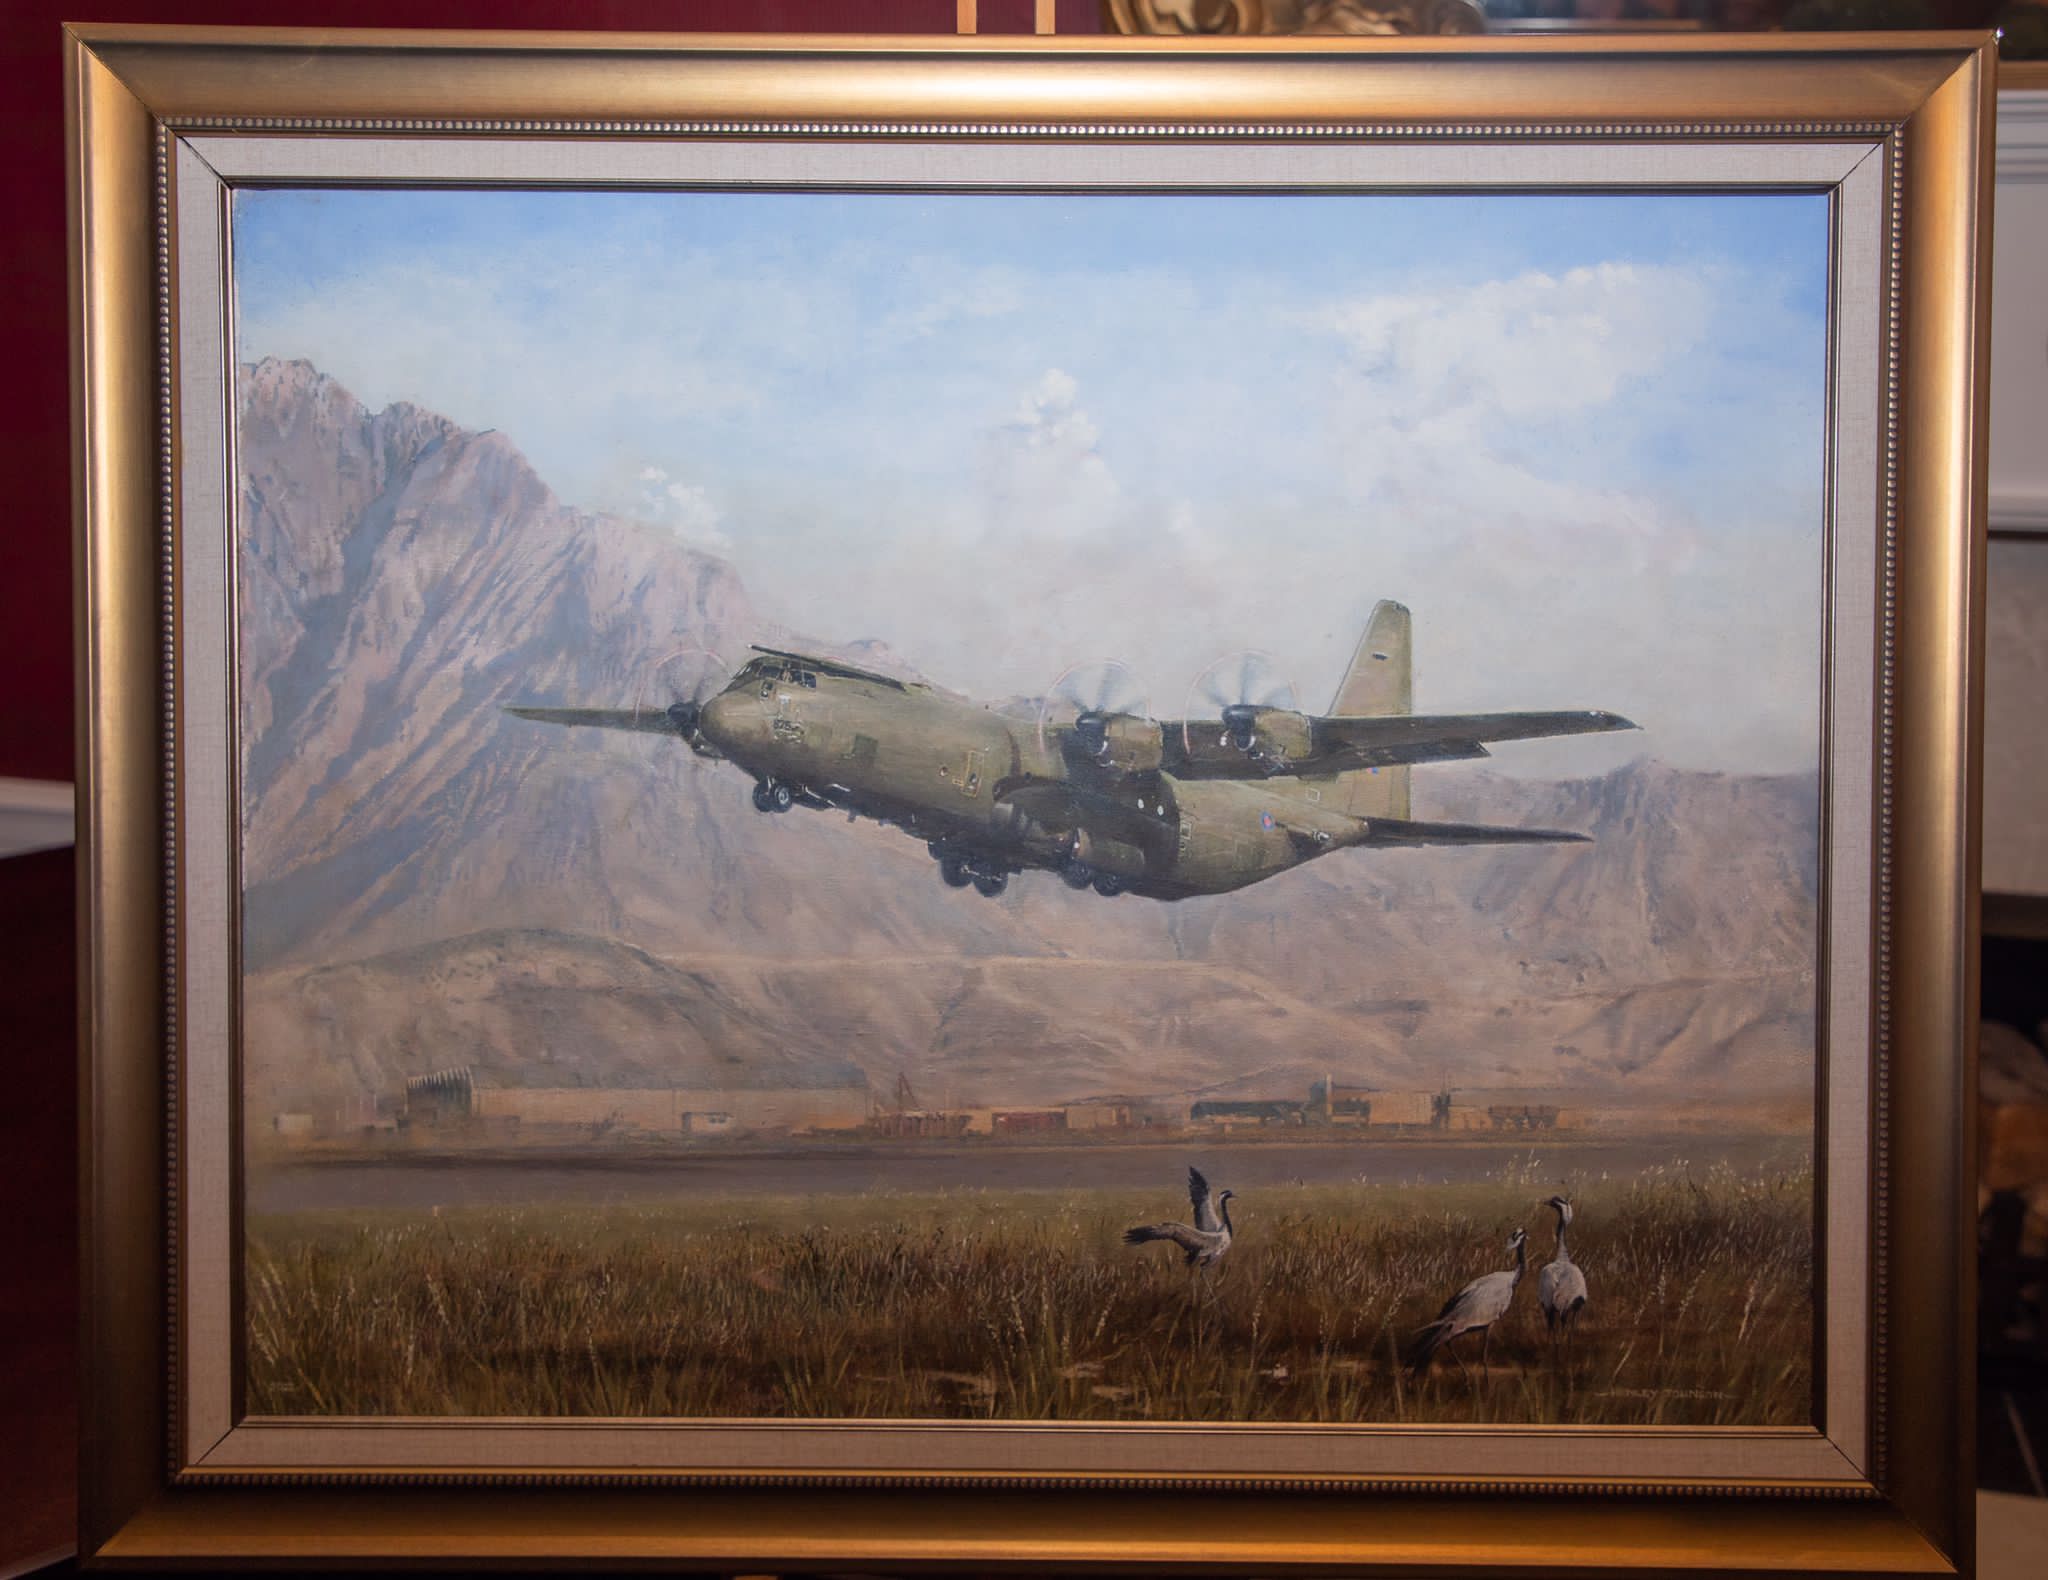 This week, a commemorative painting, named “Last Out”, was donated to recognise the service of the C-130 Hercules in the Royal Air Force.